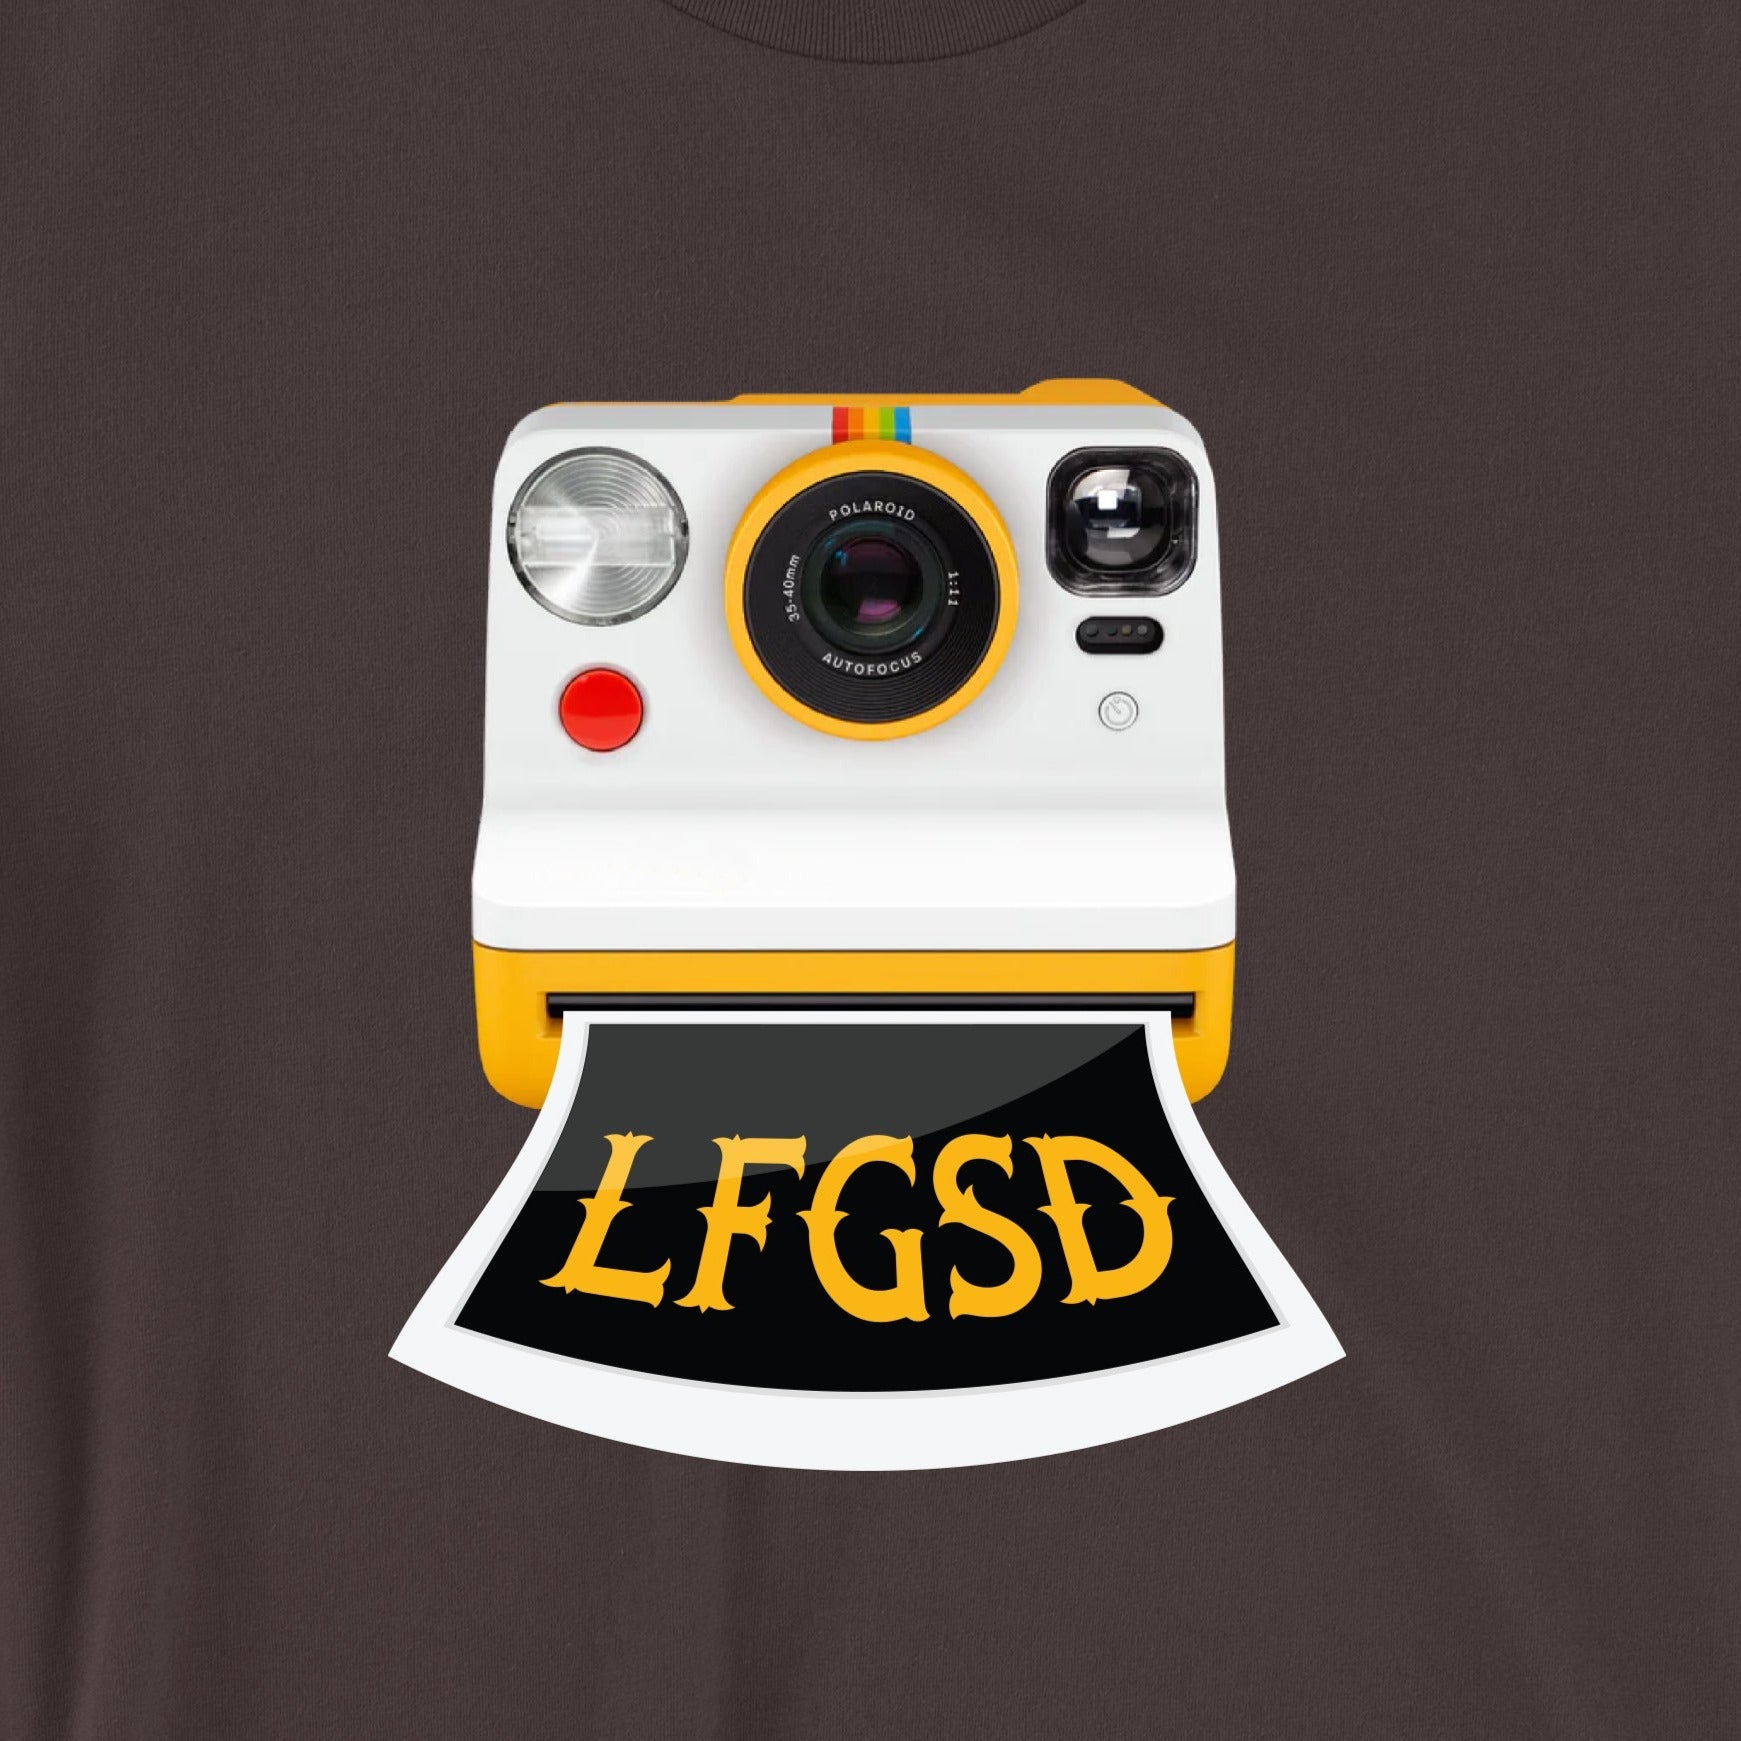 LFGSD tshirt, Slam Diego, Baseball shirt, Game day high quality adult unisex t shirt  - We're Just Getting Started